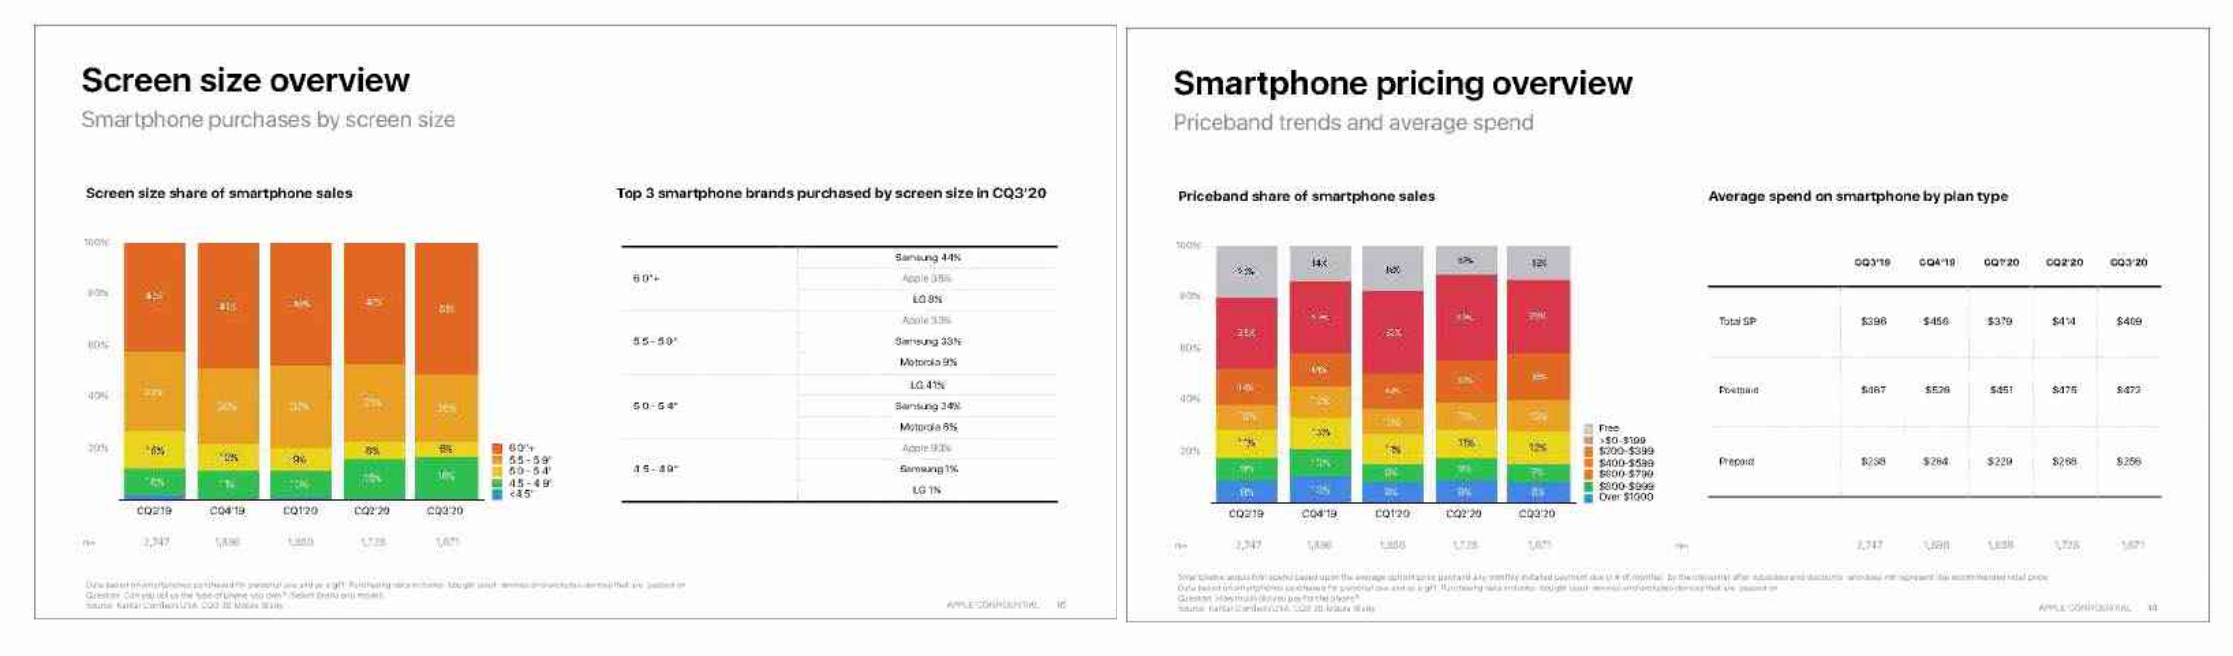 Results from a consumer purchase habit report ordered by Apple were a deciding factor in green lighting a less expensive iPhone Max for 2022 - Apple allegedly decided to make a second, less expensive iPhone Max in 2022 after it saw this report